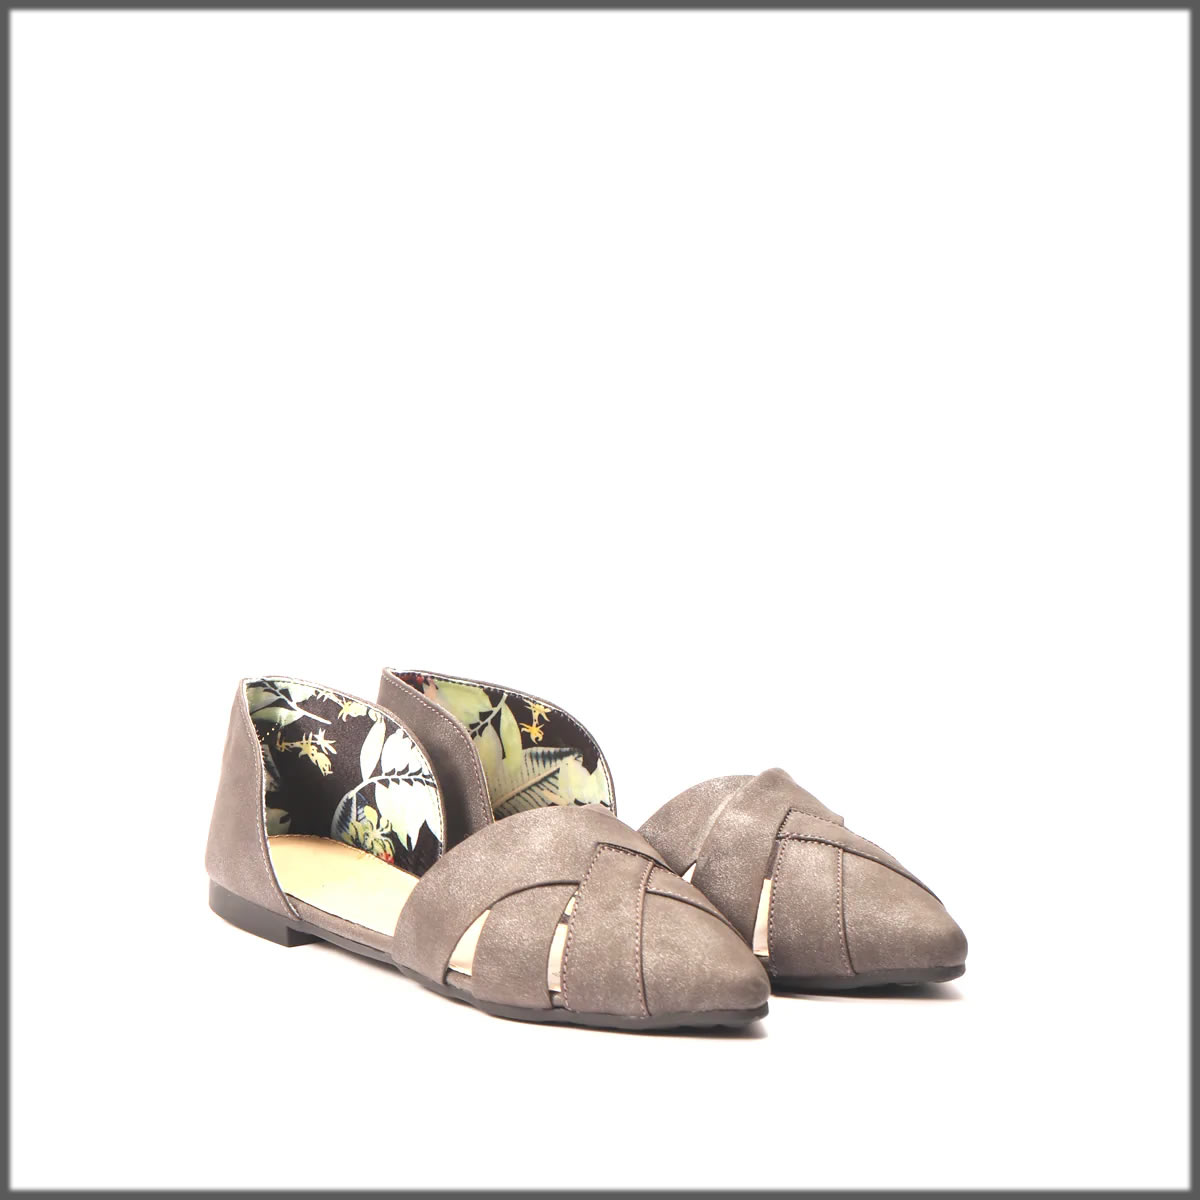 hush puppies winter shoes collection for women